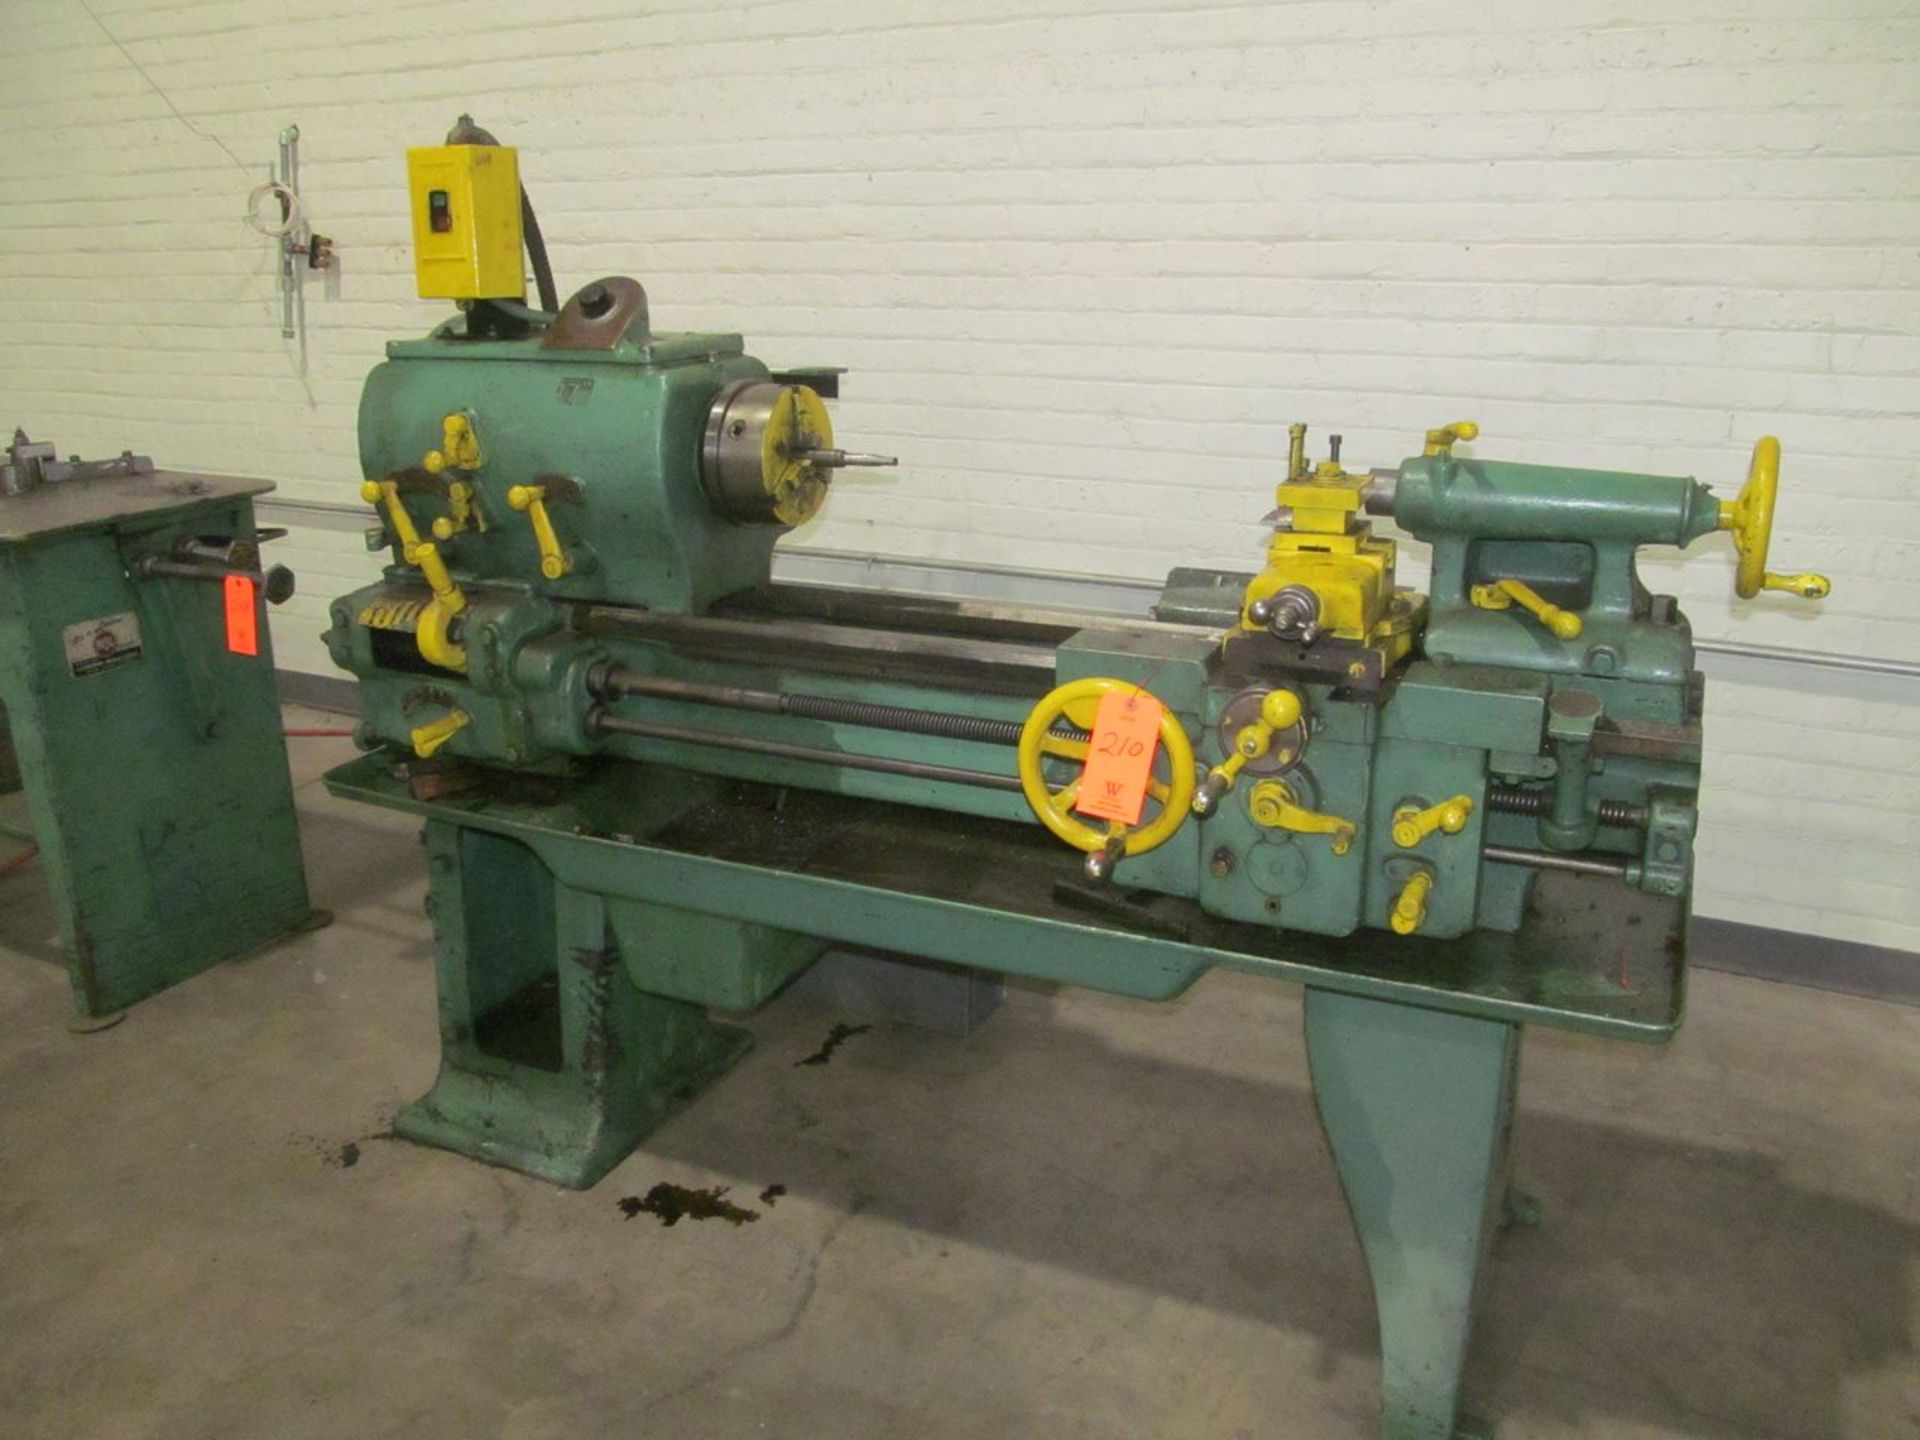 LeBlond Regal 17 in. x 30 in. (approx.) Tool Room Lathe; with 8 in. 3-Jaw Chuck, 1-1/2 in. Hole Thru